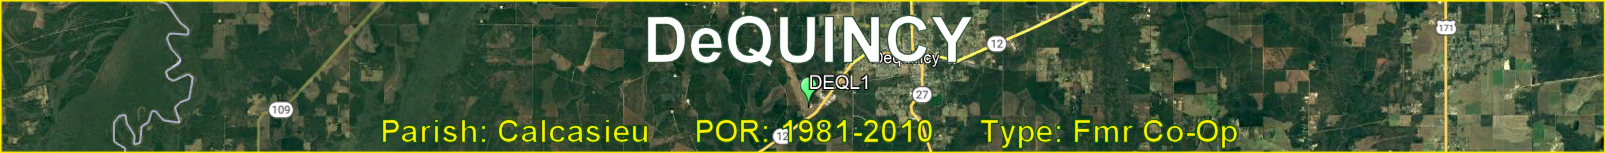 Title image for DeQuincy